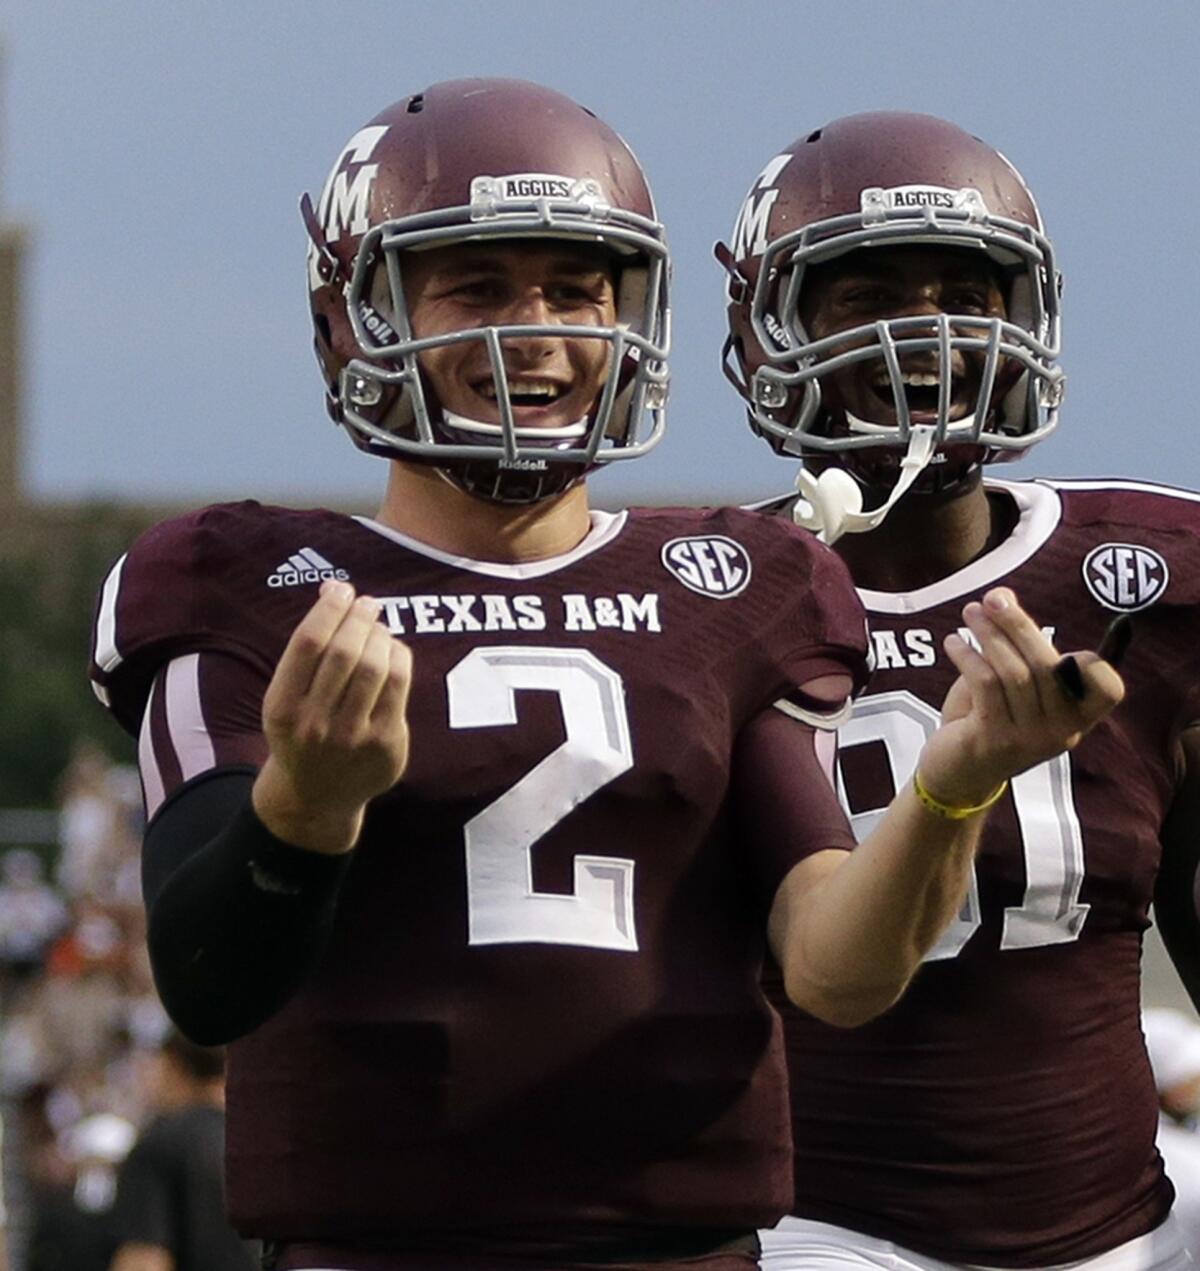 Texas A&M; quarterback Johnny Manziel will see plenty of TV time Saturday when the Aggies play host to national title contender Alabama.